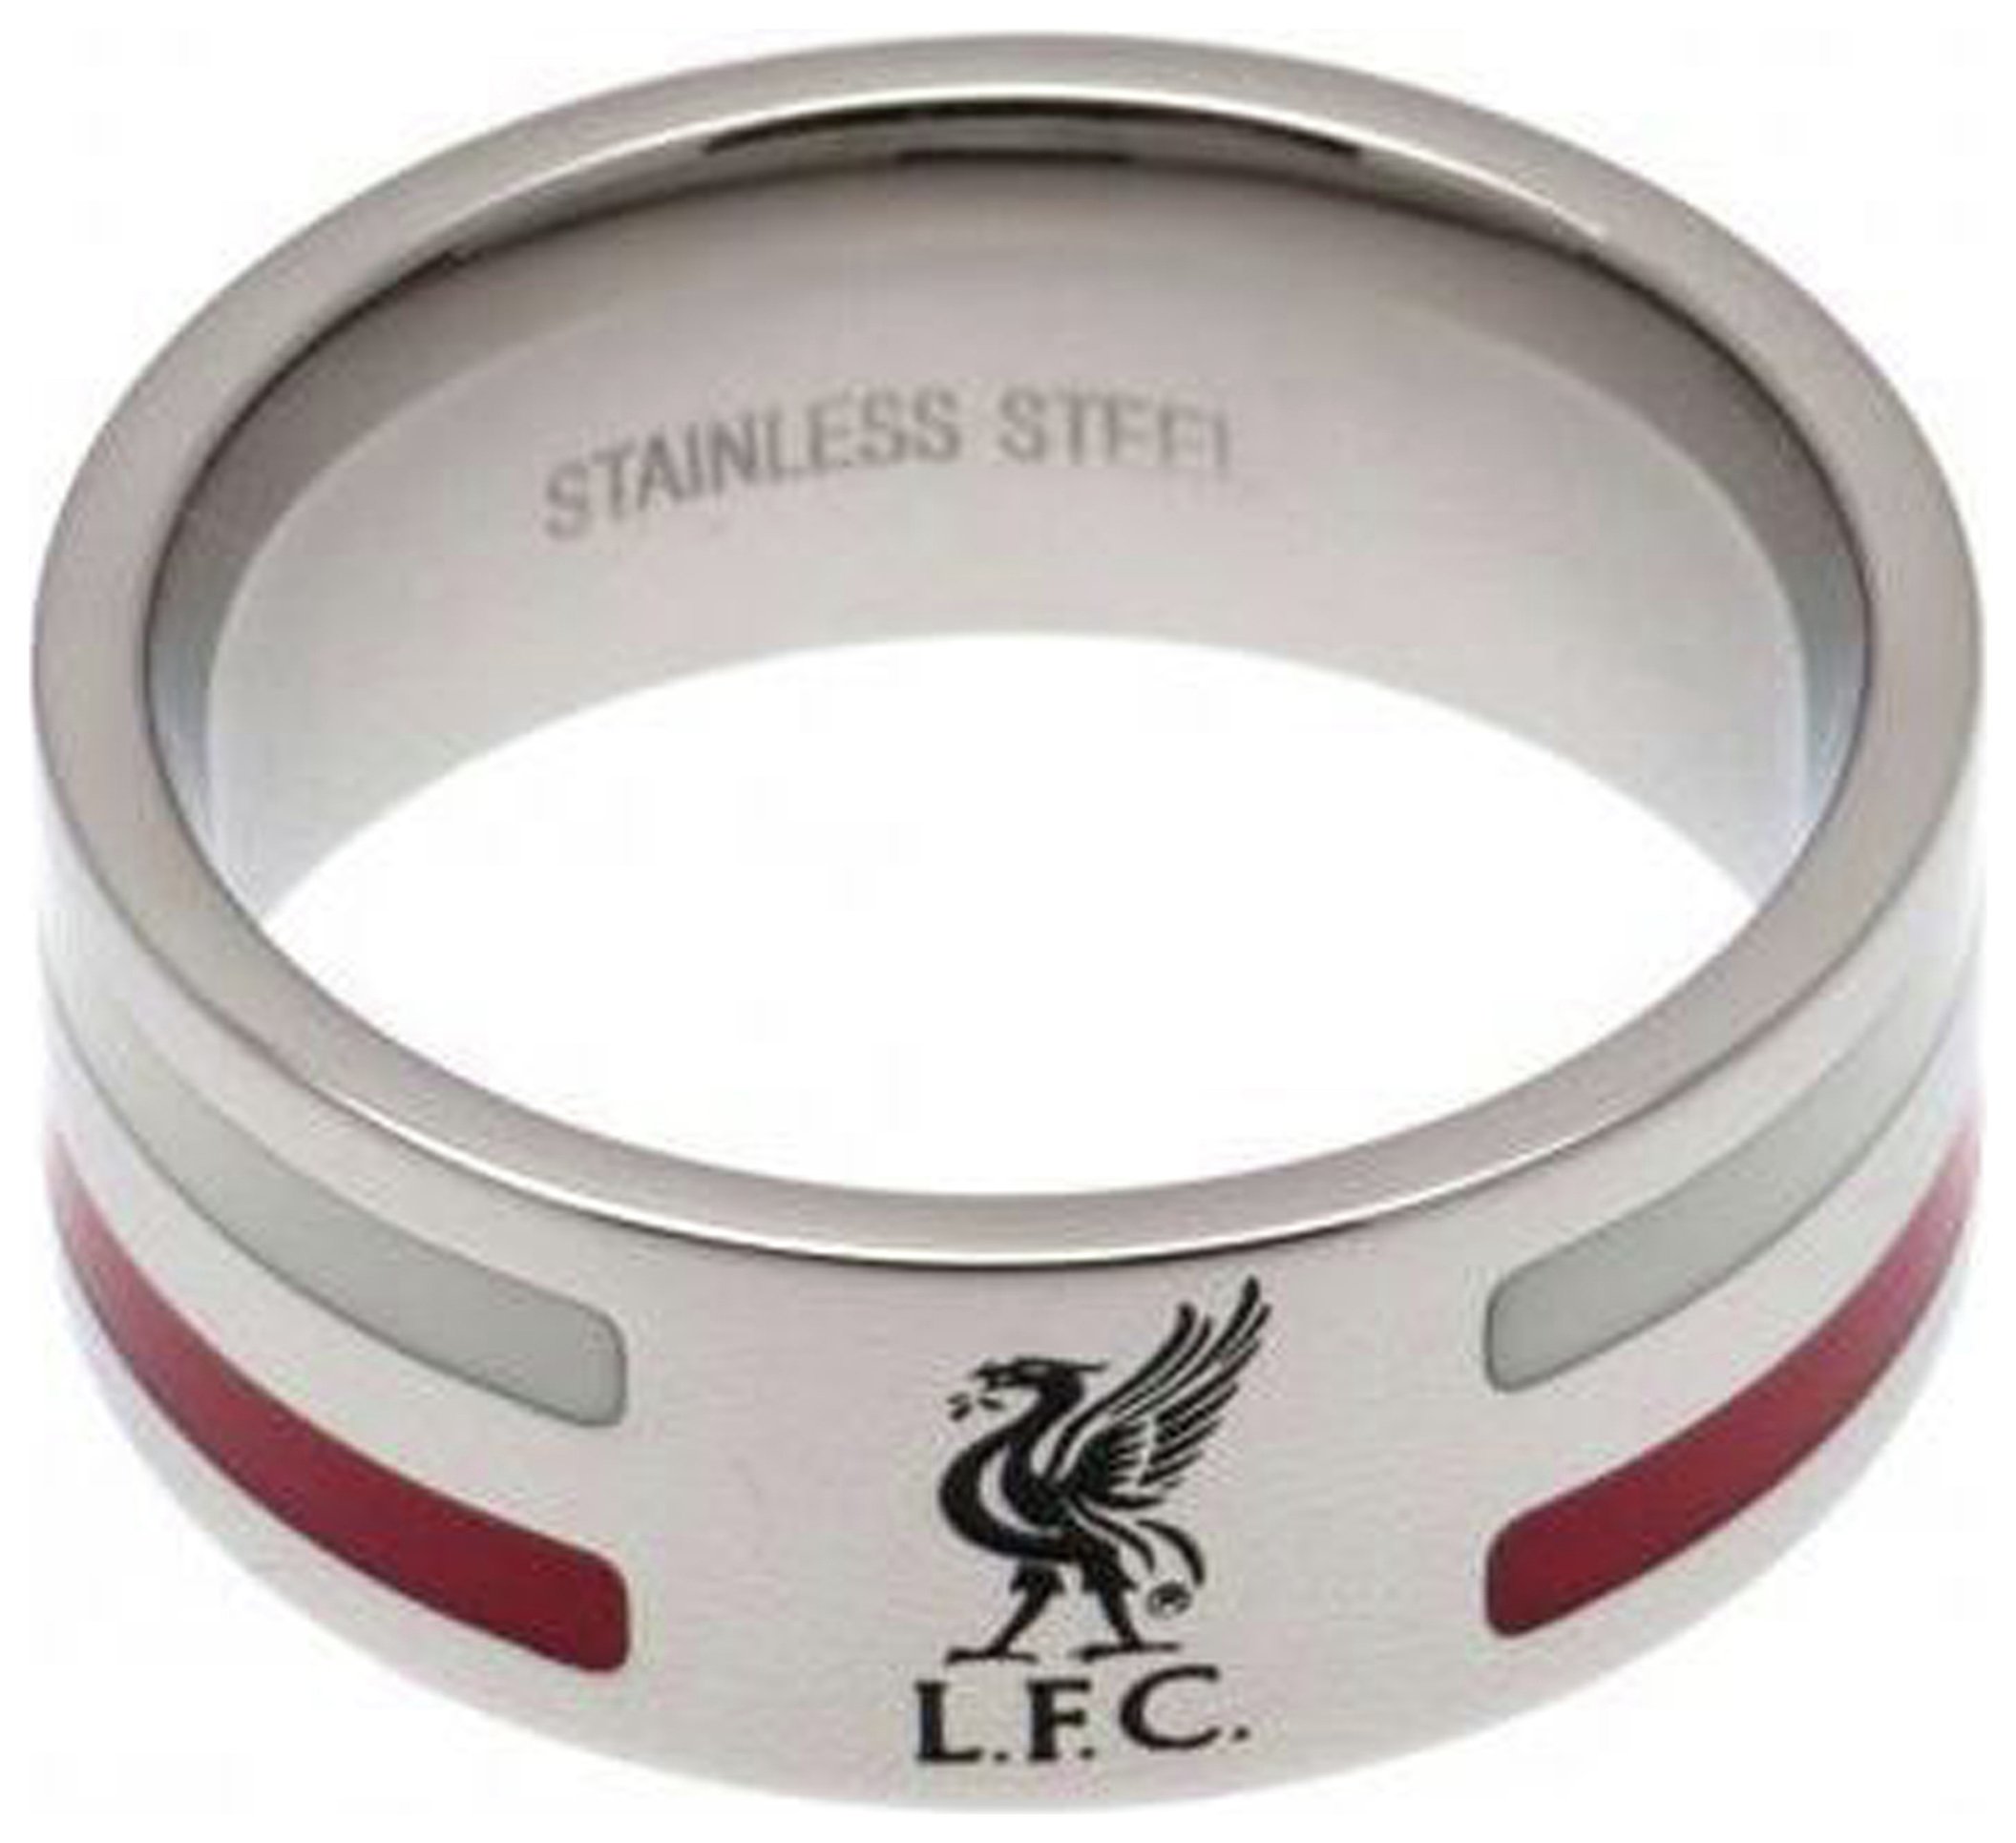 Stainless Steel Liverpool Striped Ring - Size U.